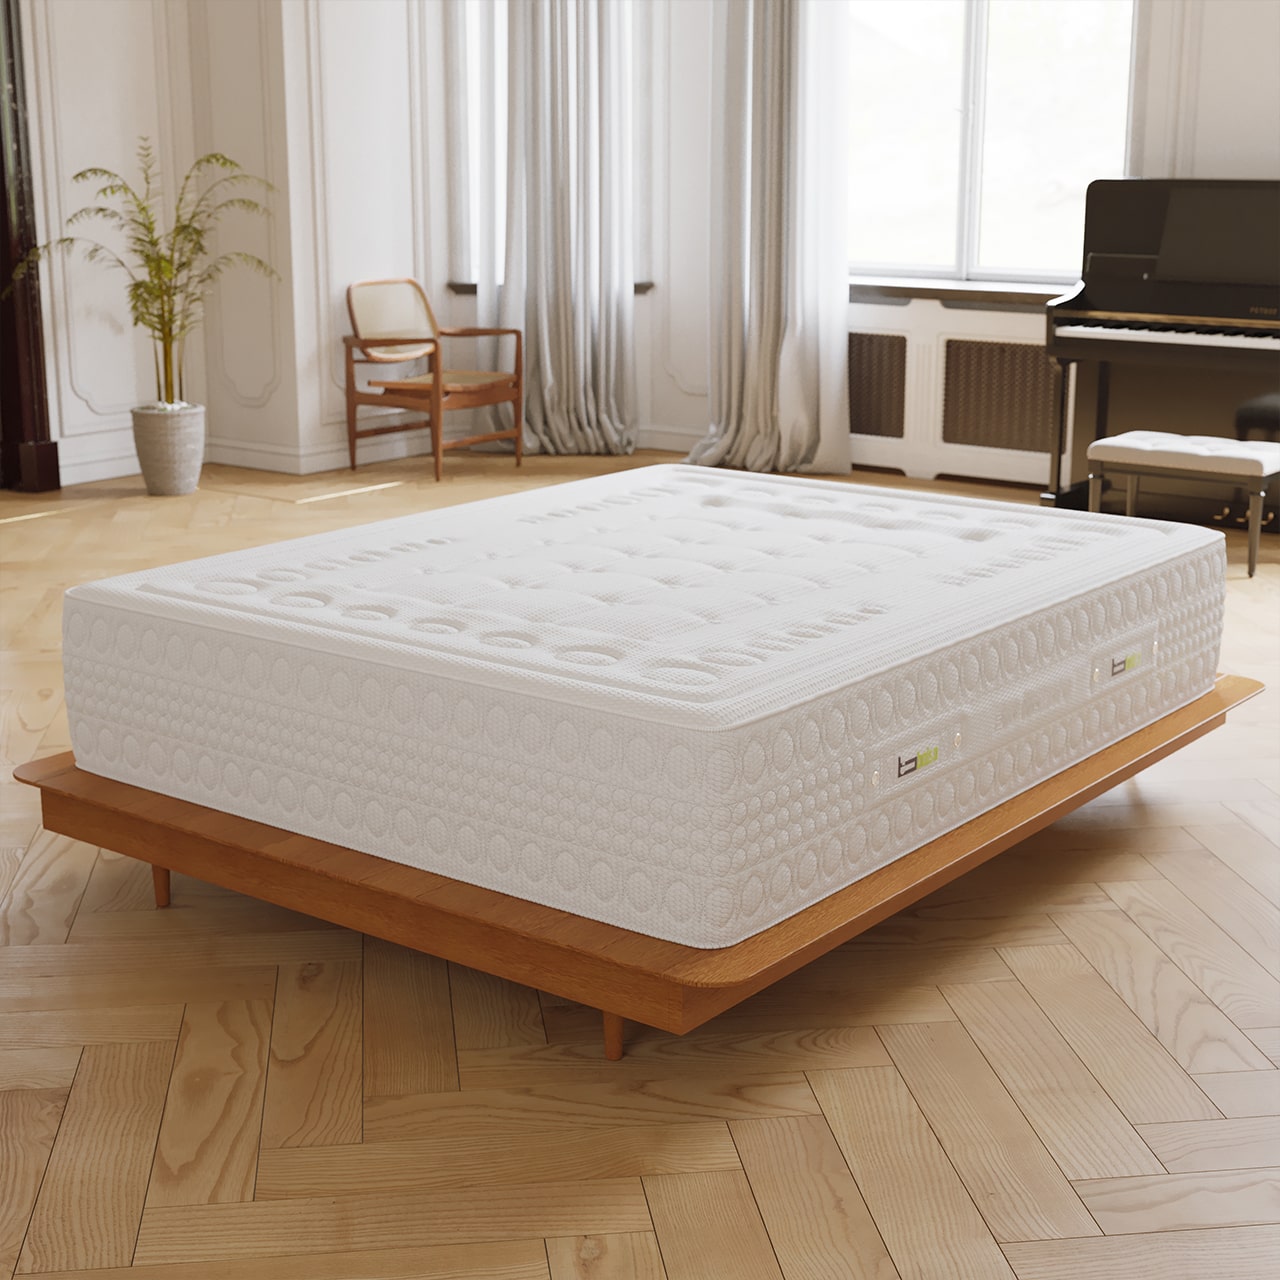 Bioform balsa medical mattress for two and one person